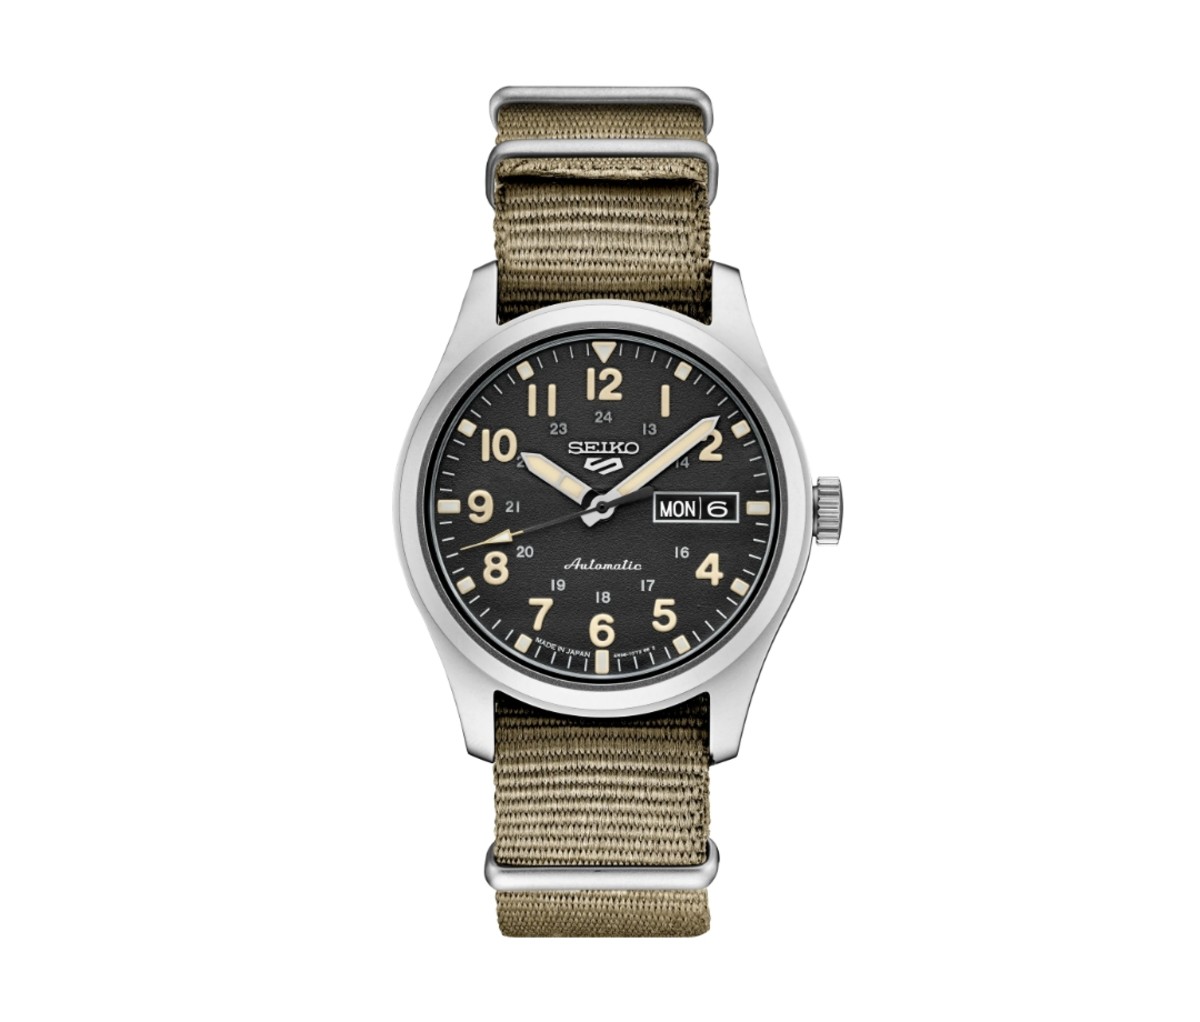 Field Watches Guide 2022: 15 Options for Mil-Spec Style - Men's Journal